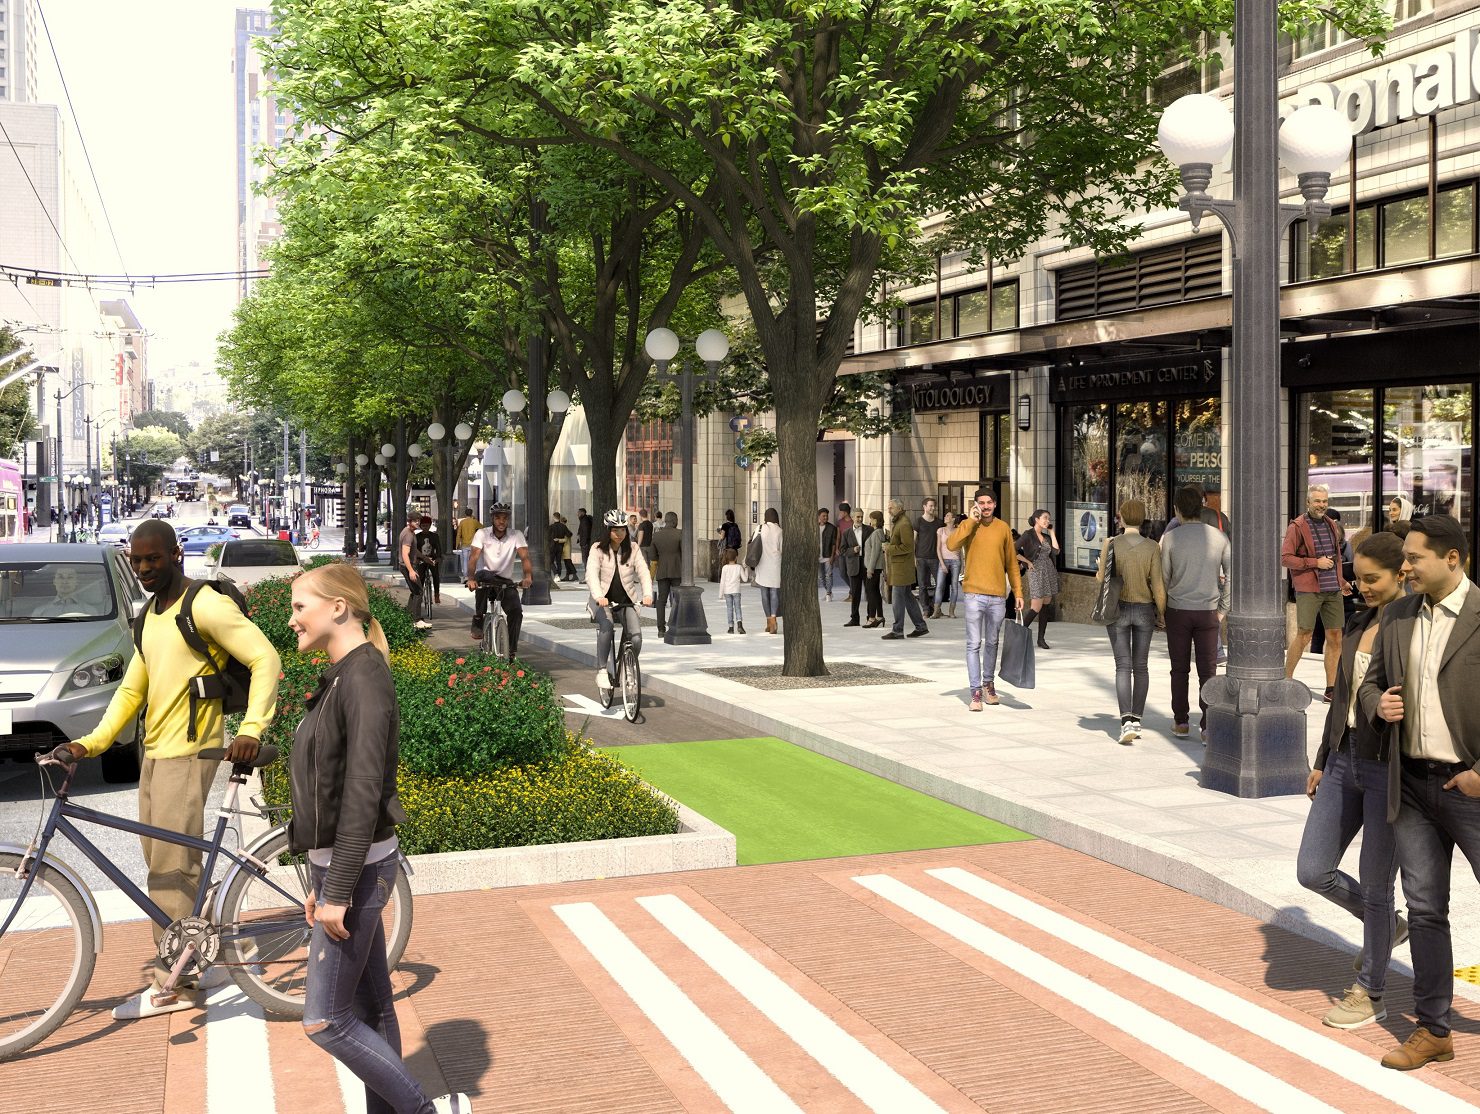 Rendering and visualization of sidewalk, crosswalk, and protected bike lane, with people walking and biking. Large trees, planter beds, and buildings are in the background.